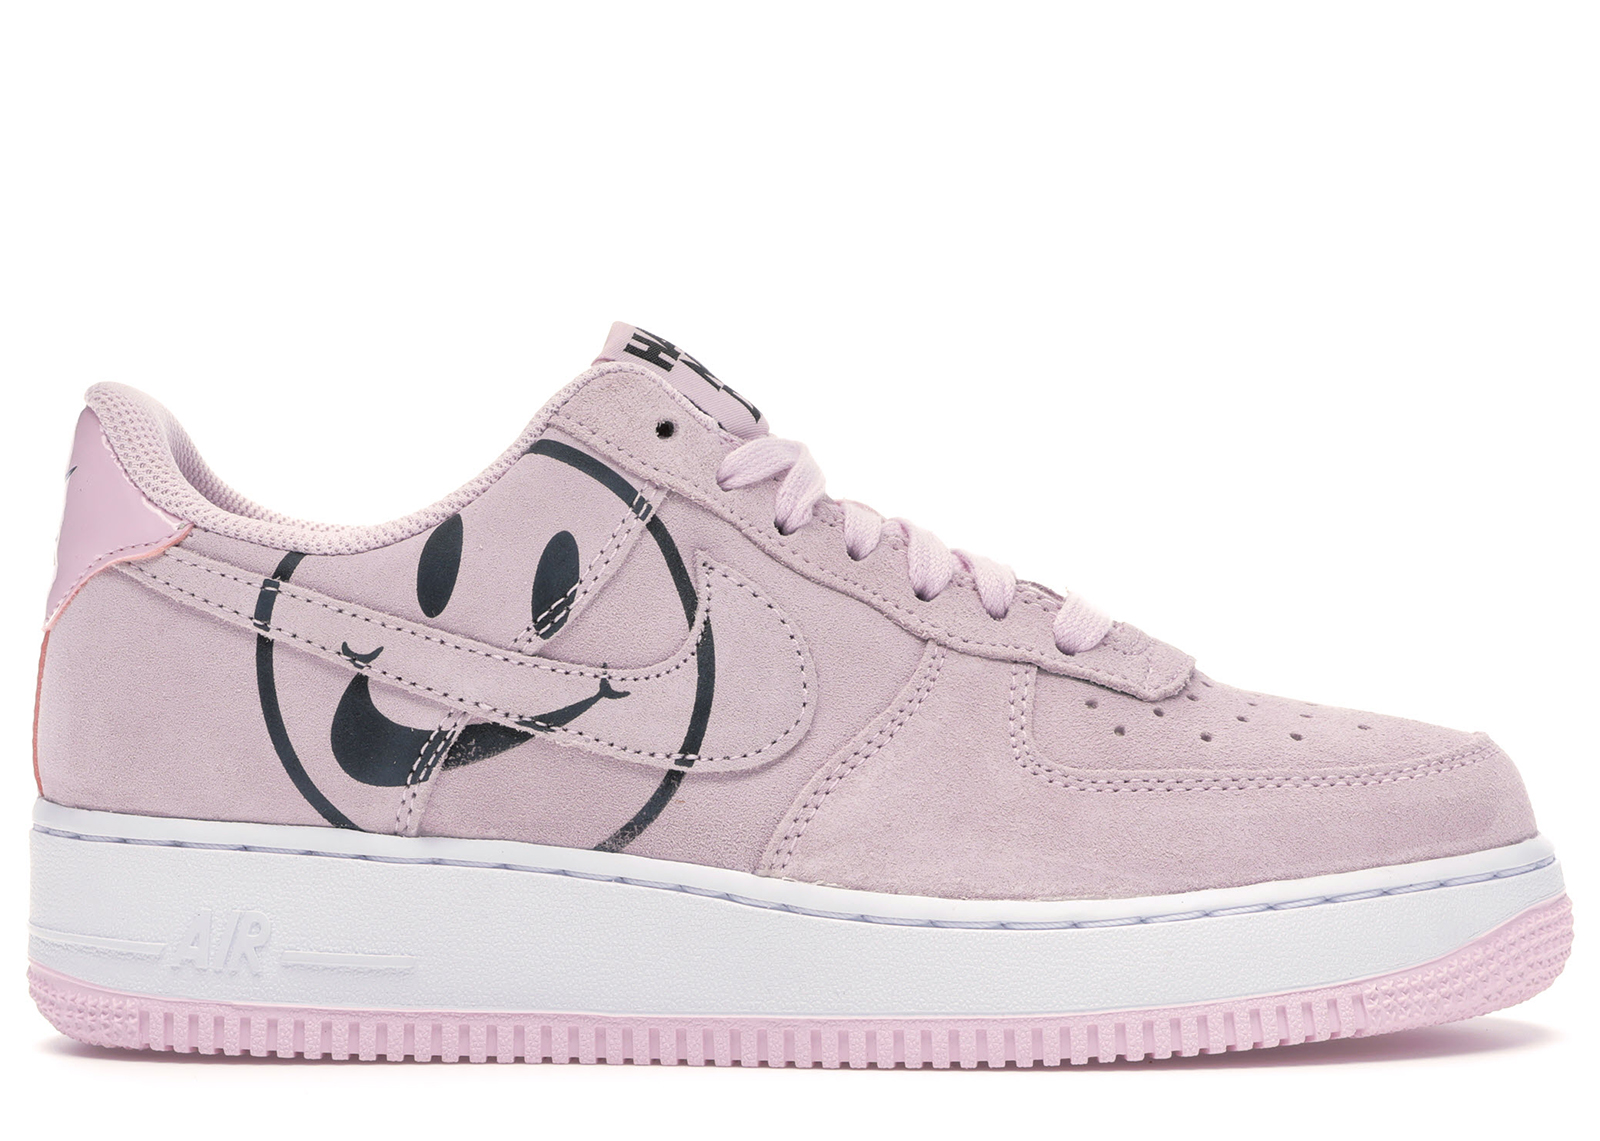 air force 1s have a nike day